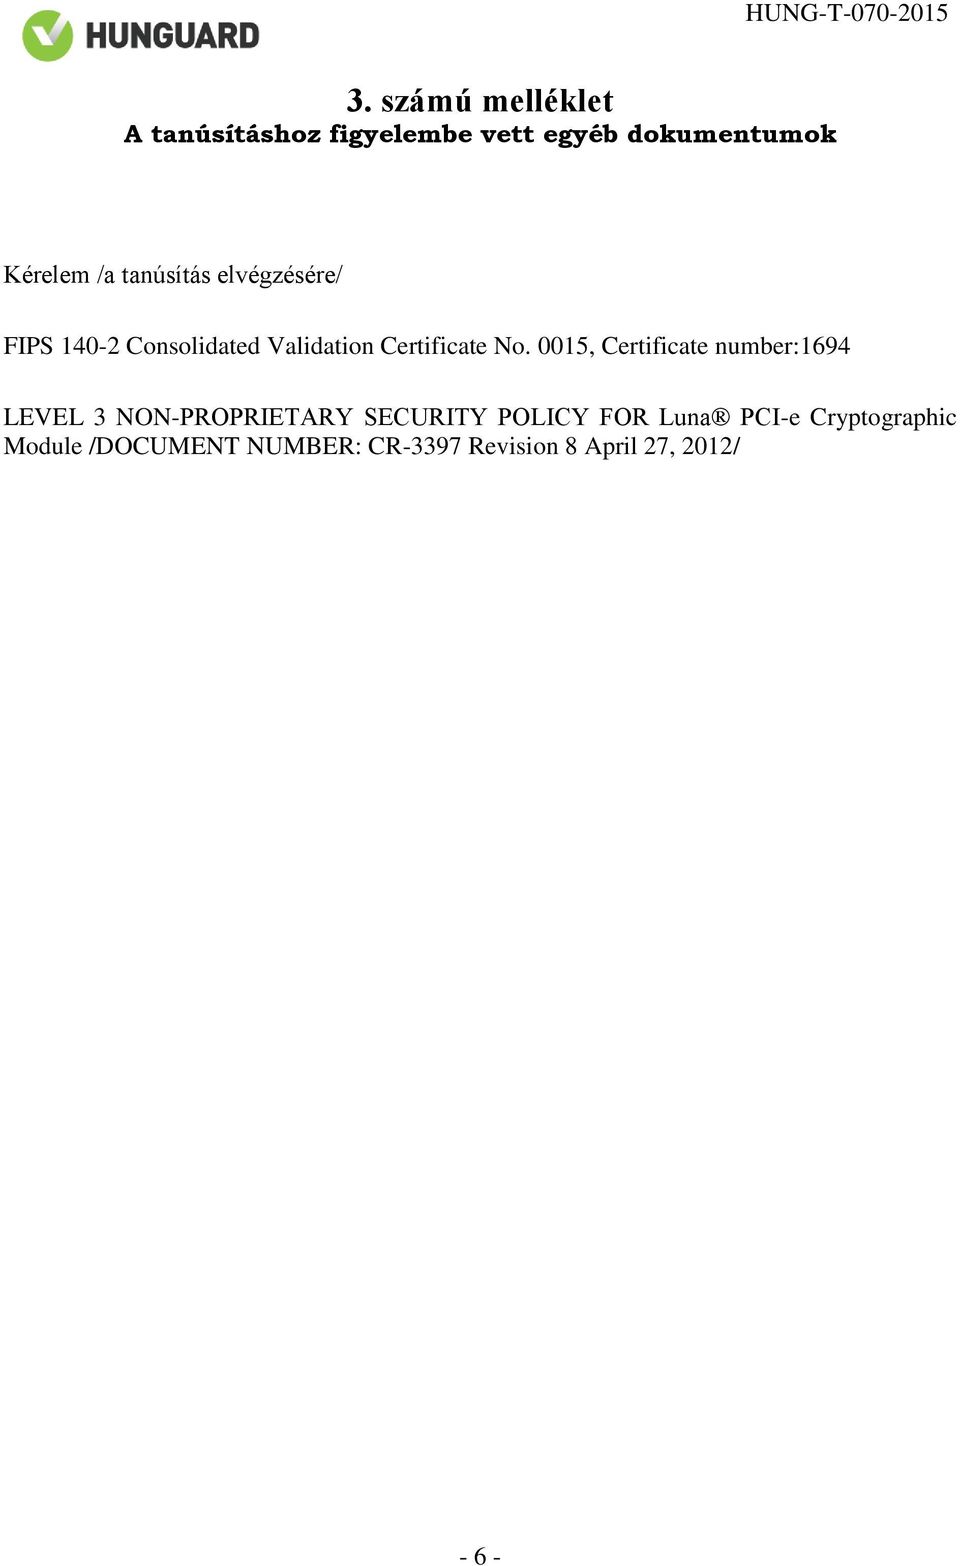 0015, Certificate number:1694 LEVEL 3 NON-PROPRIETARY SECURITY POLICY FOR Luna